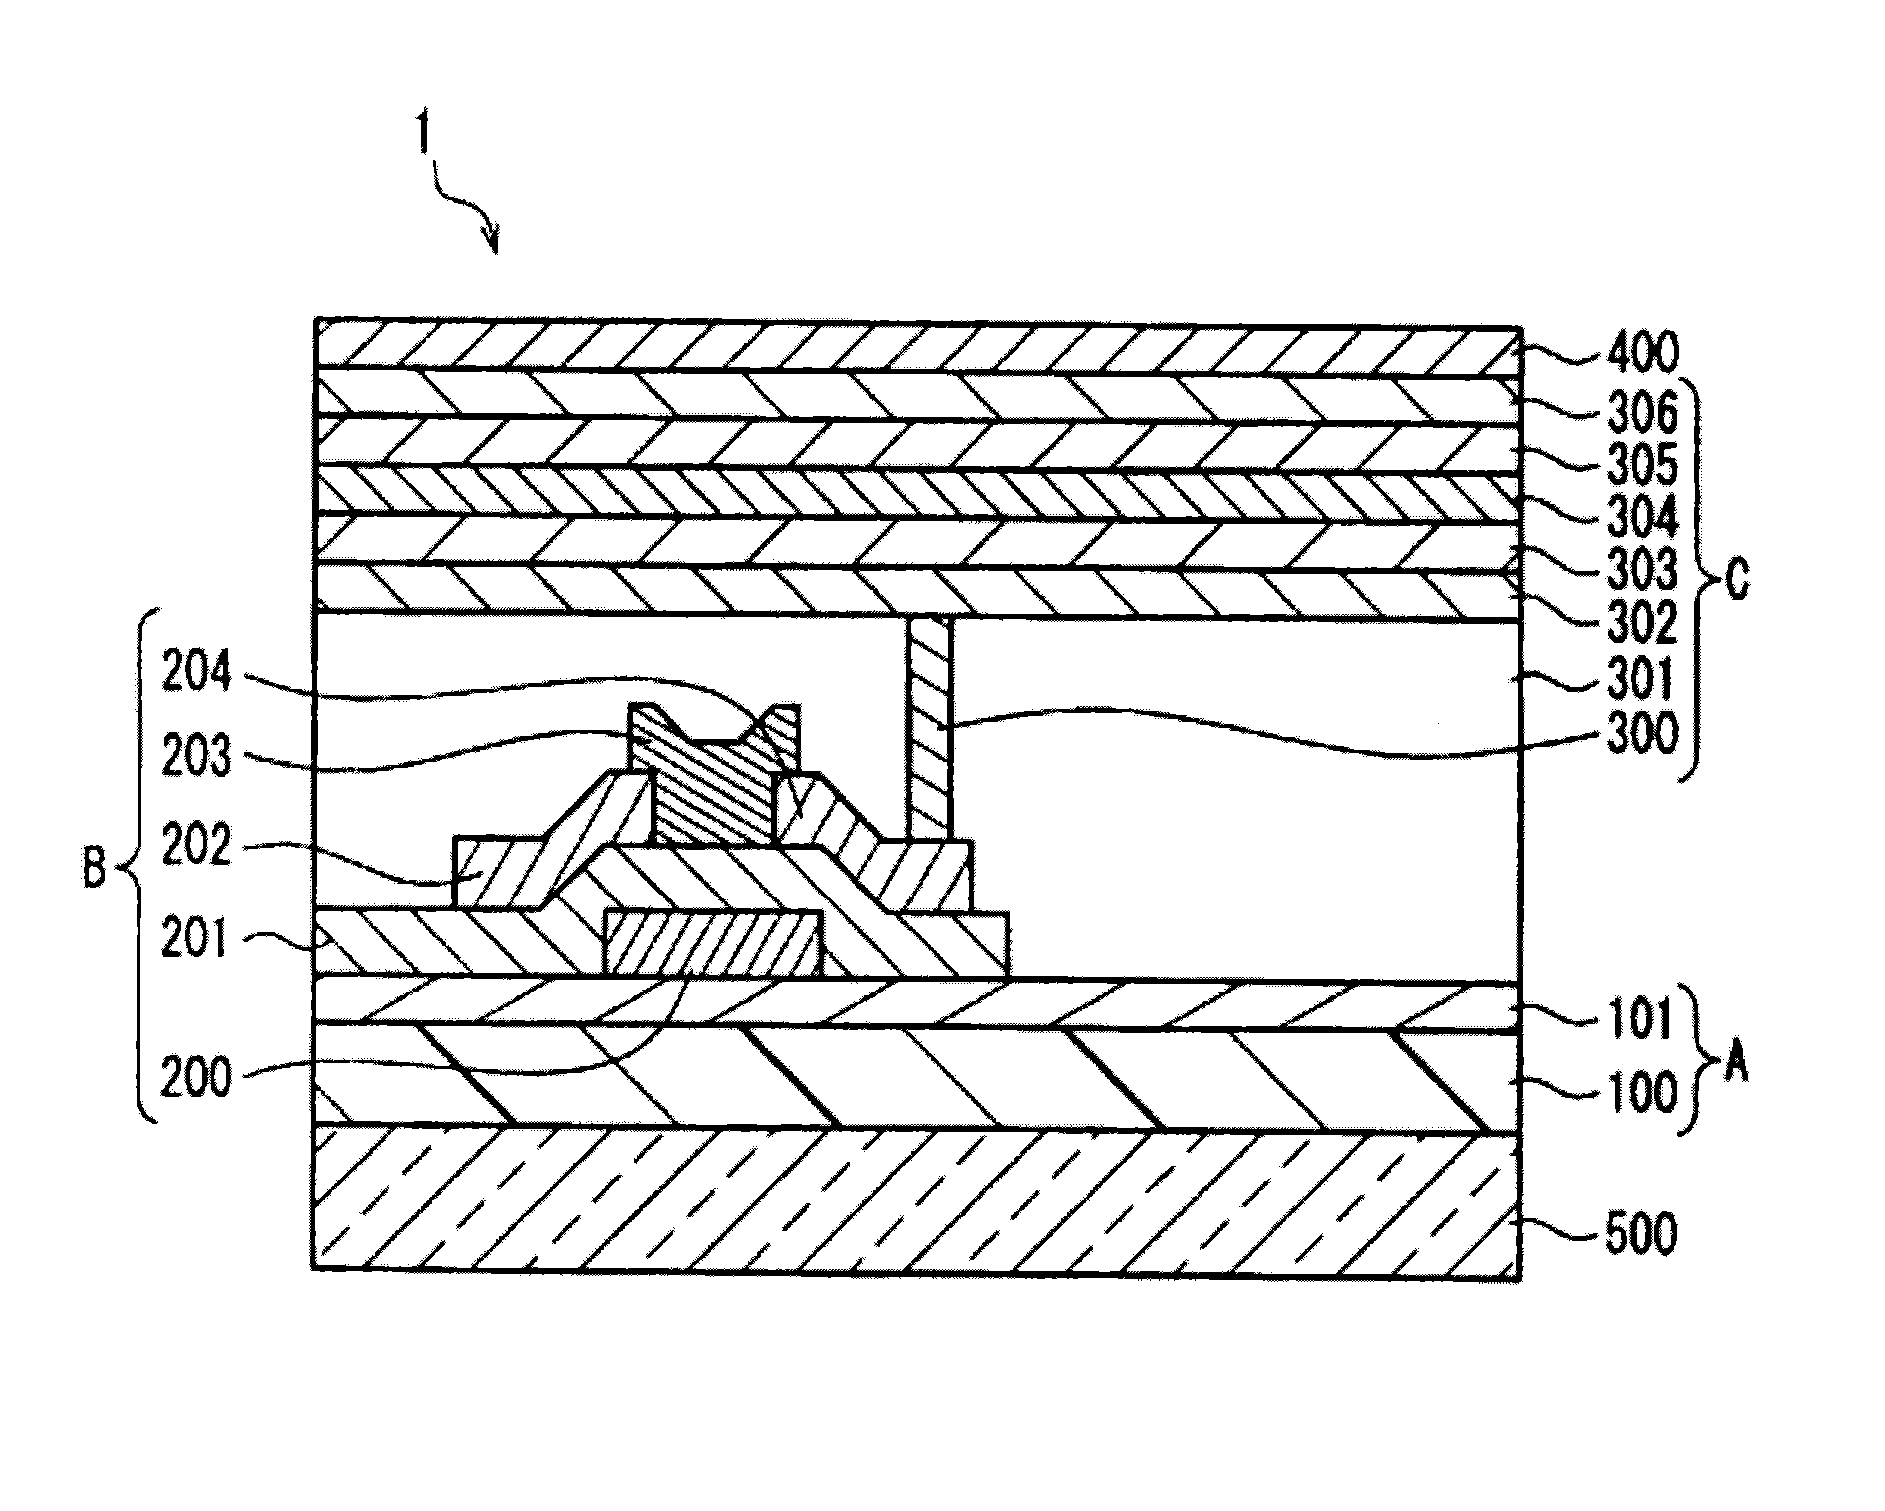 Solution of aromatic polyamide for producing display element, optical element, or illumination element